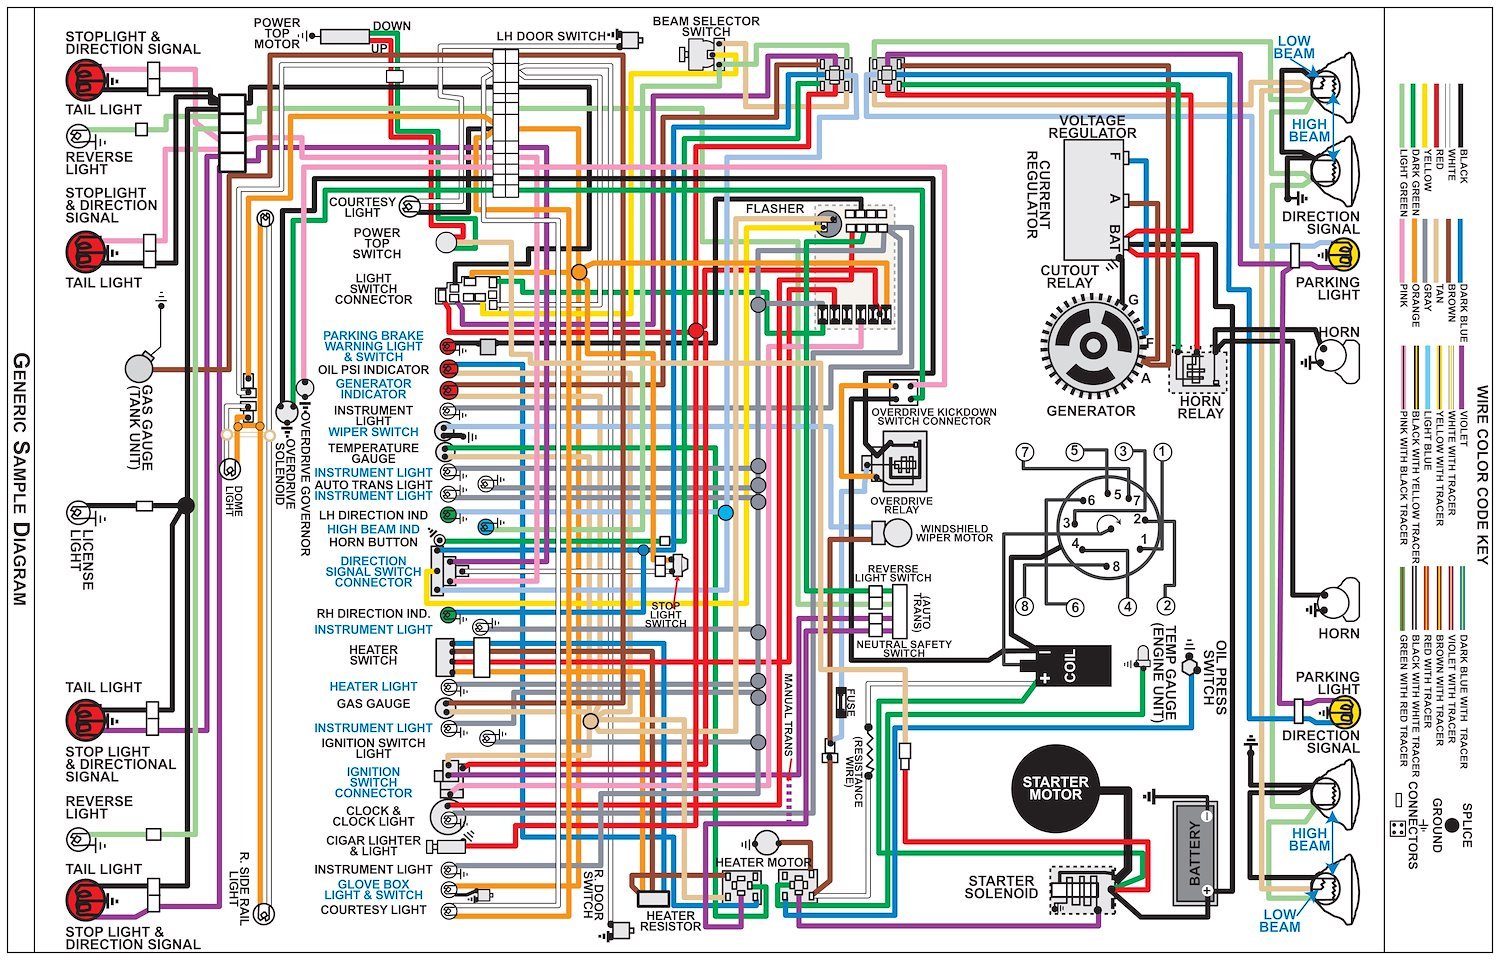 Wiring Diagram for 1961-1962 Ford Falcon, 11 in x 17 in., Laminated